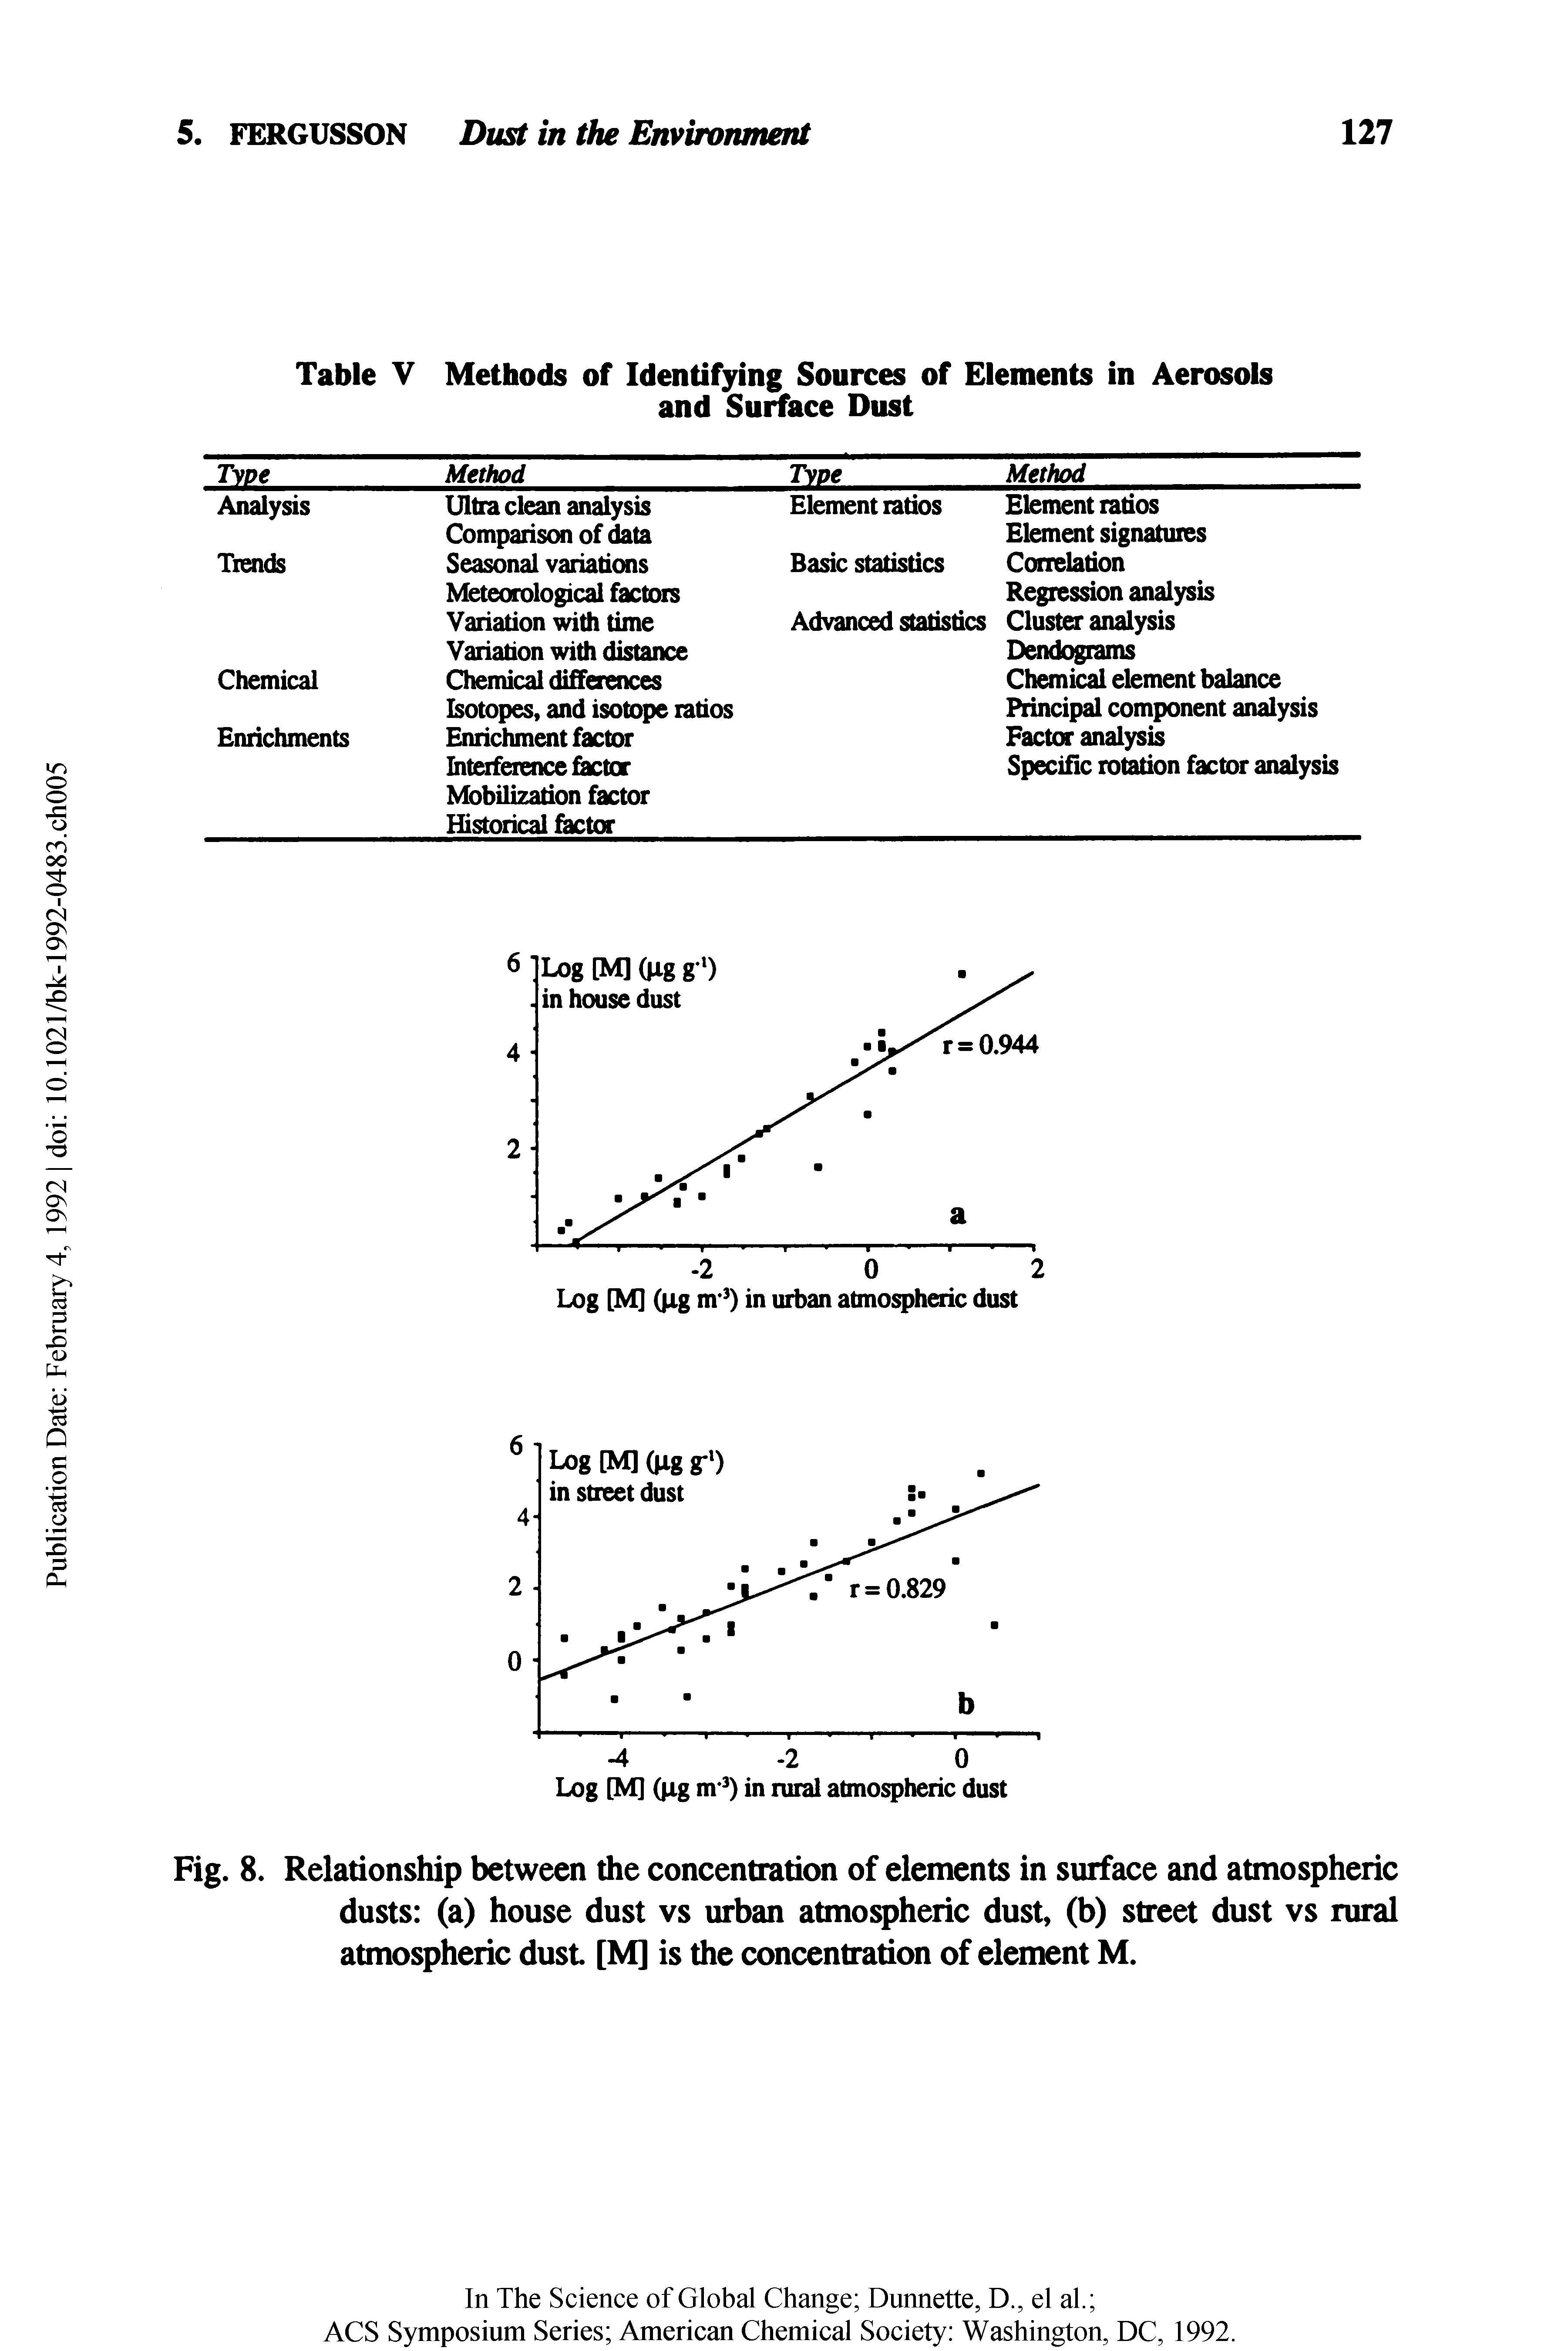 Table V Methods of Identifying Sources of Elements in Aerosols and Surface Dust...